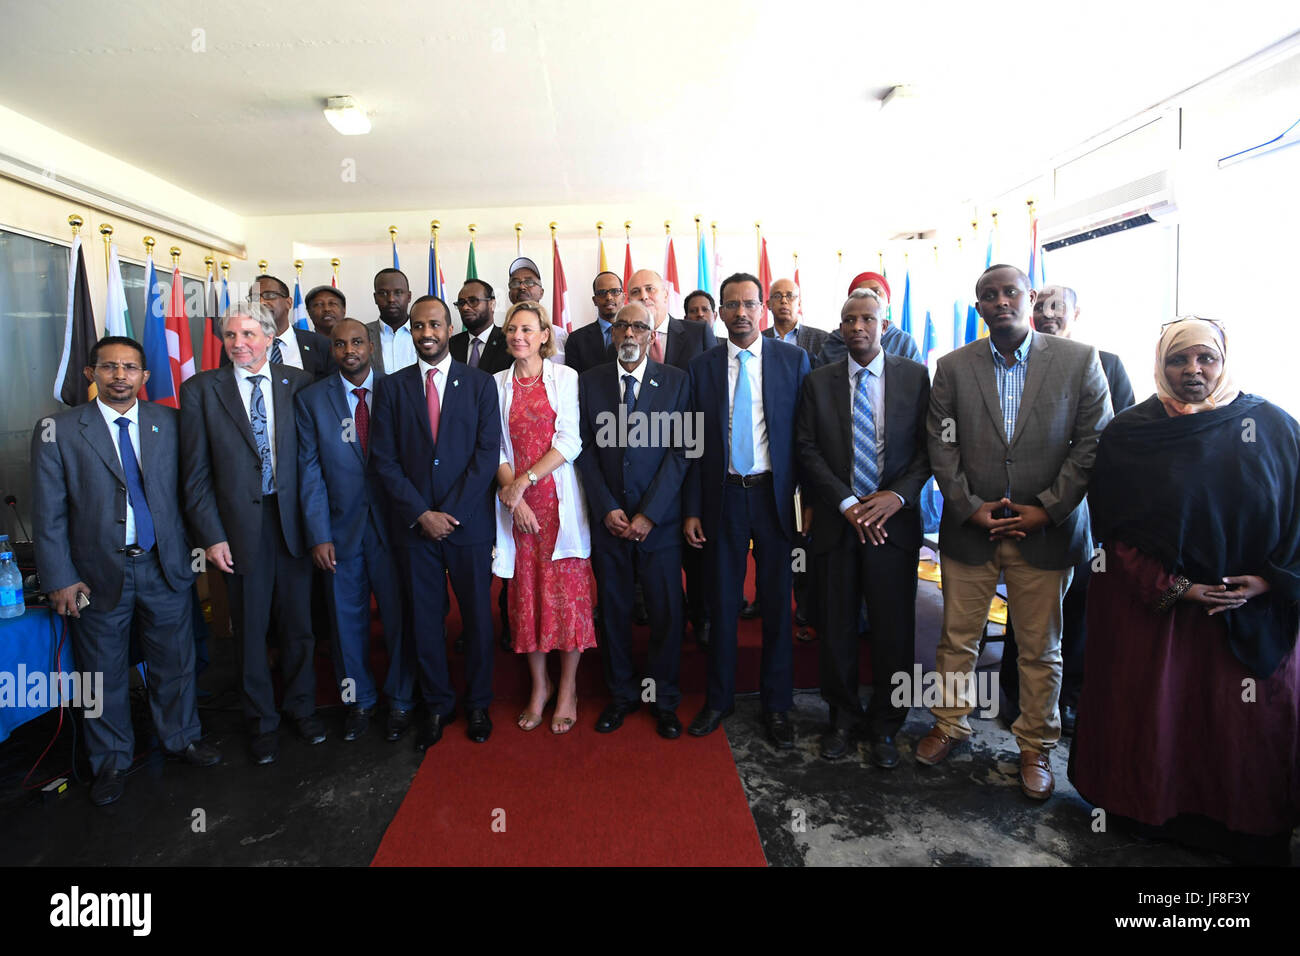 Officials from Somali Federal Government, European Union, diplomats and guests pose for a group photograph during a ceremony to mark Europe Day in Mogadishu on May 09, 2017. AMISOM Photo / Omar Abdisalan Stock Photo